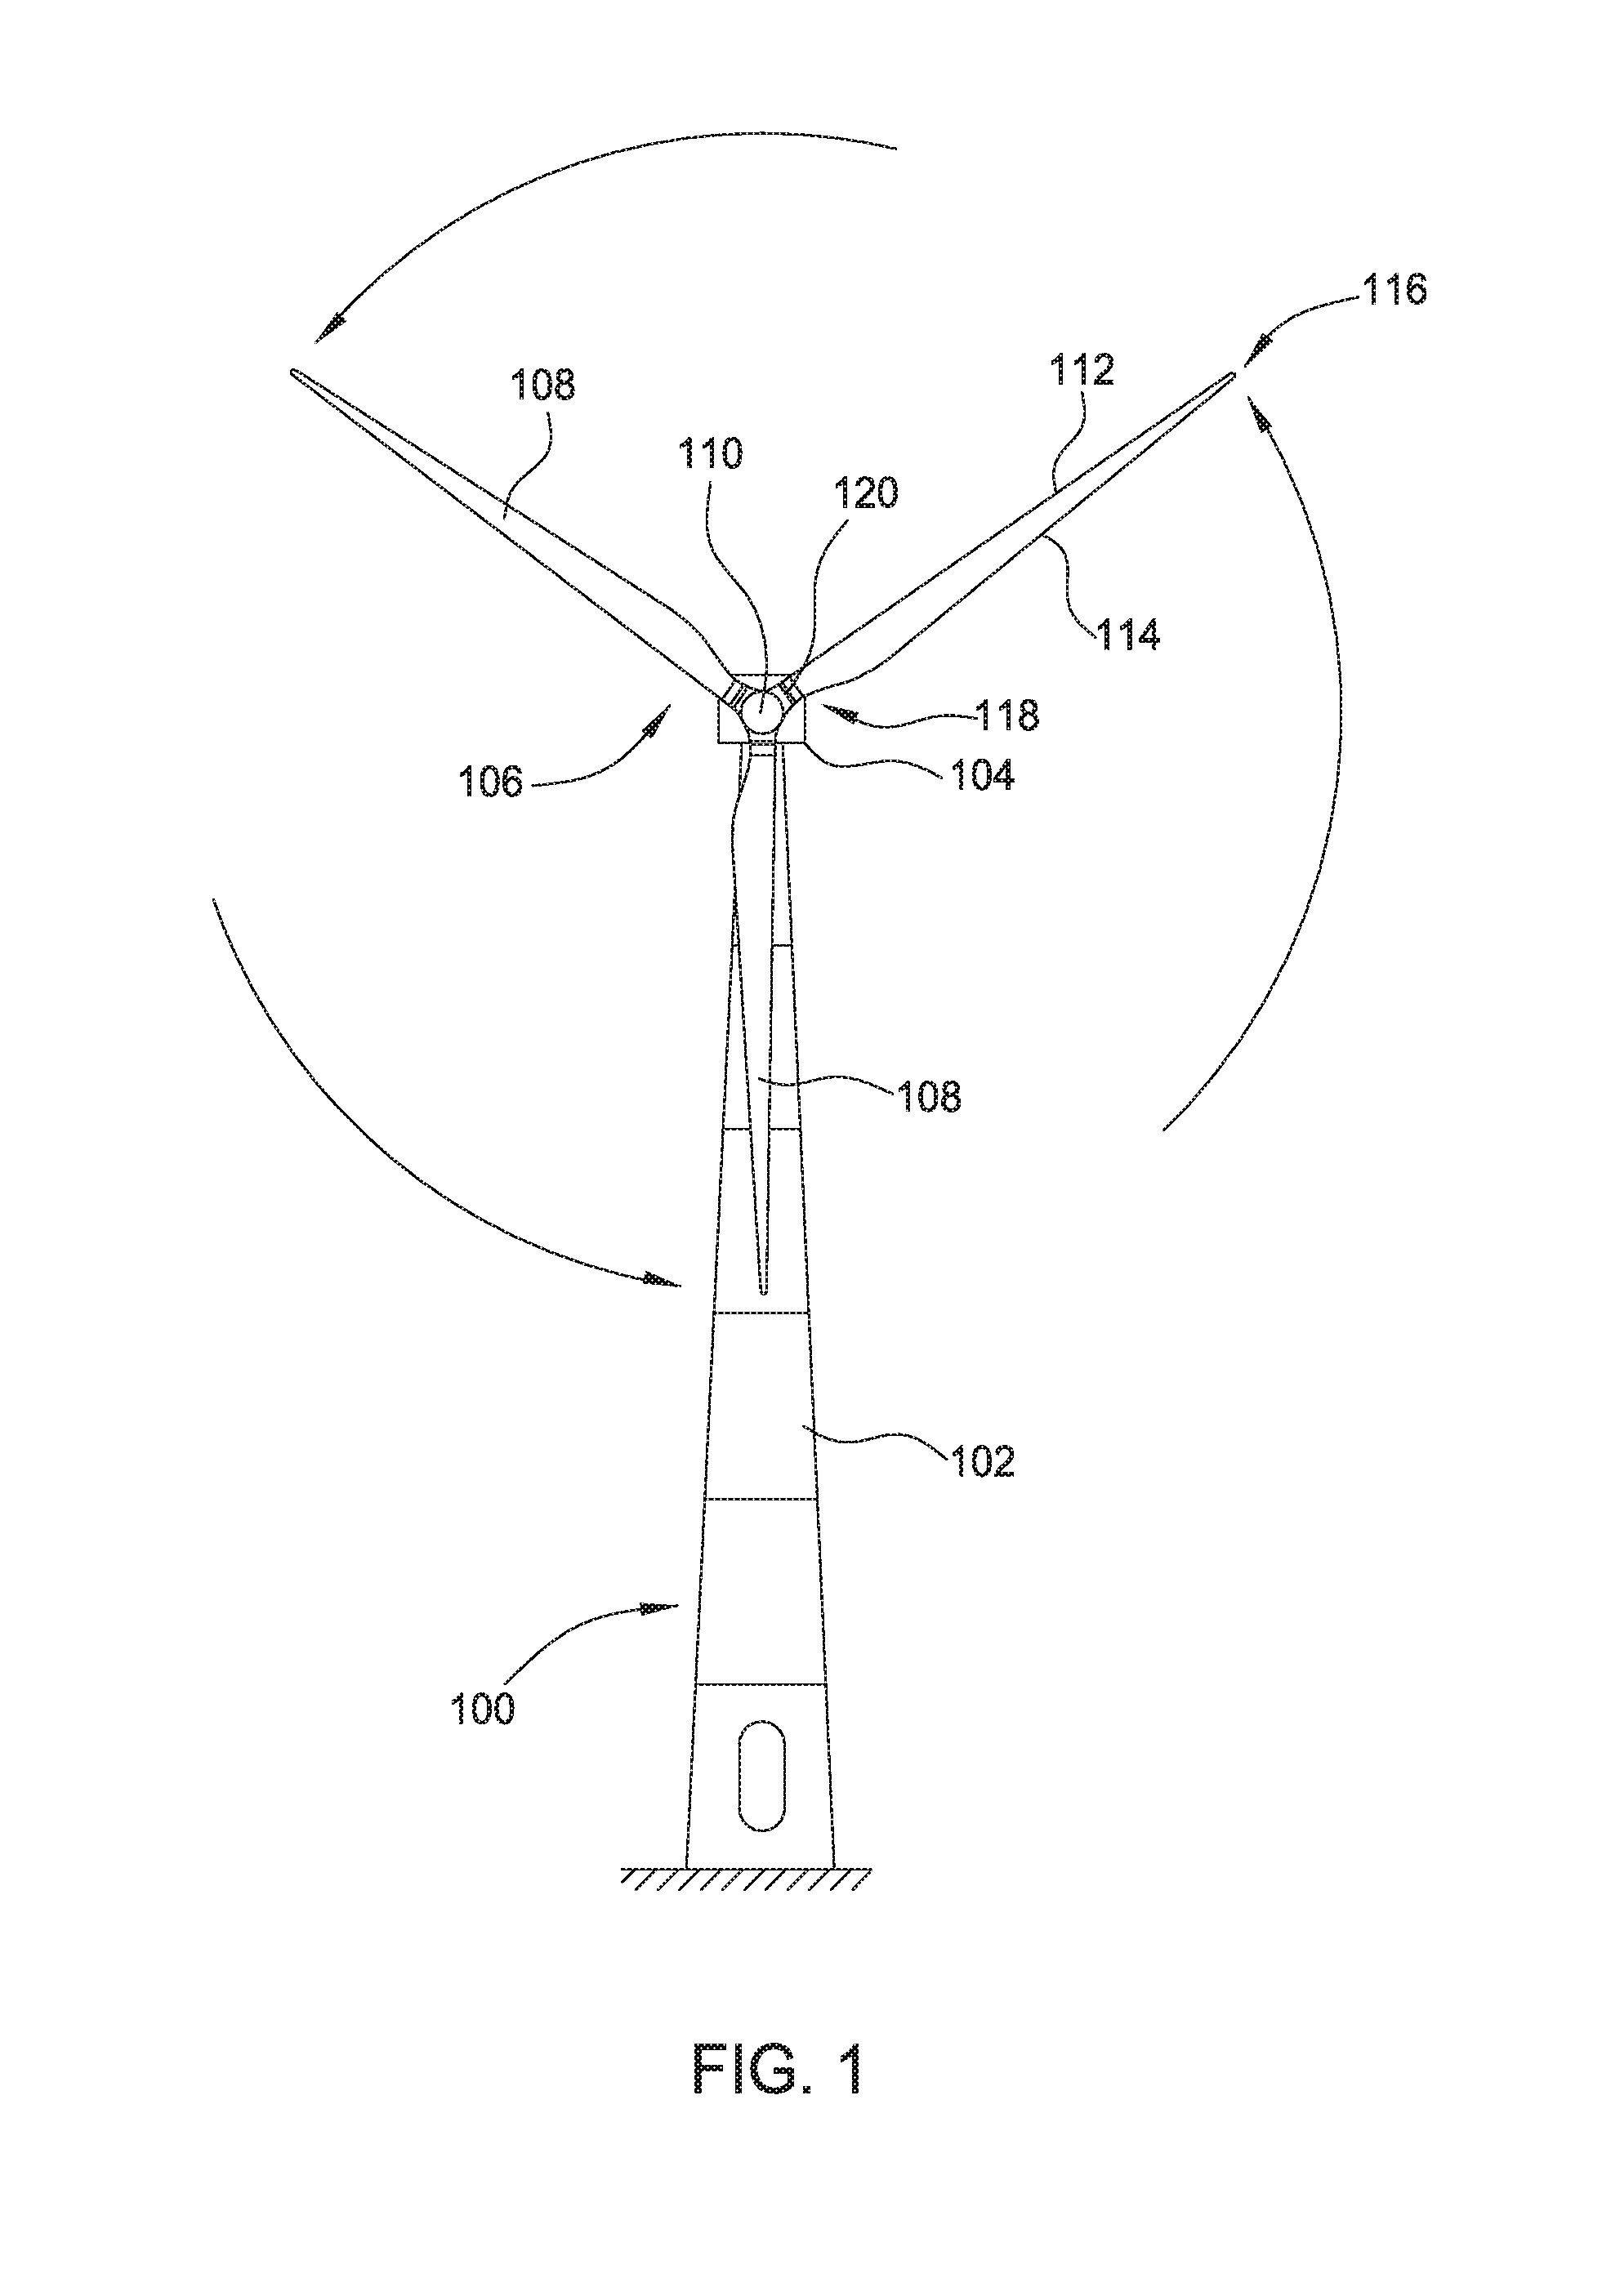 Speed management of a wind turbine when switching electrical configurations